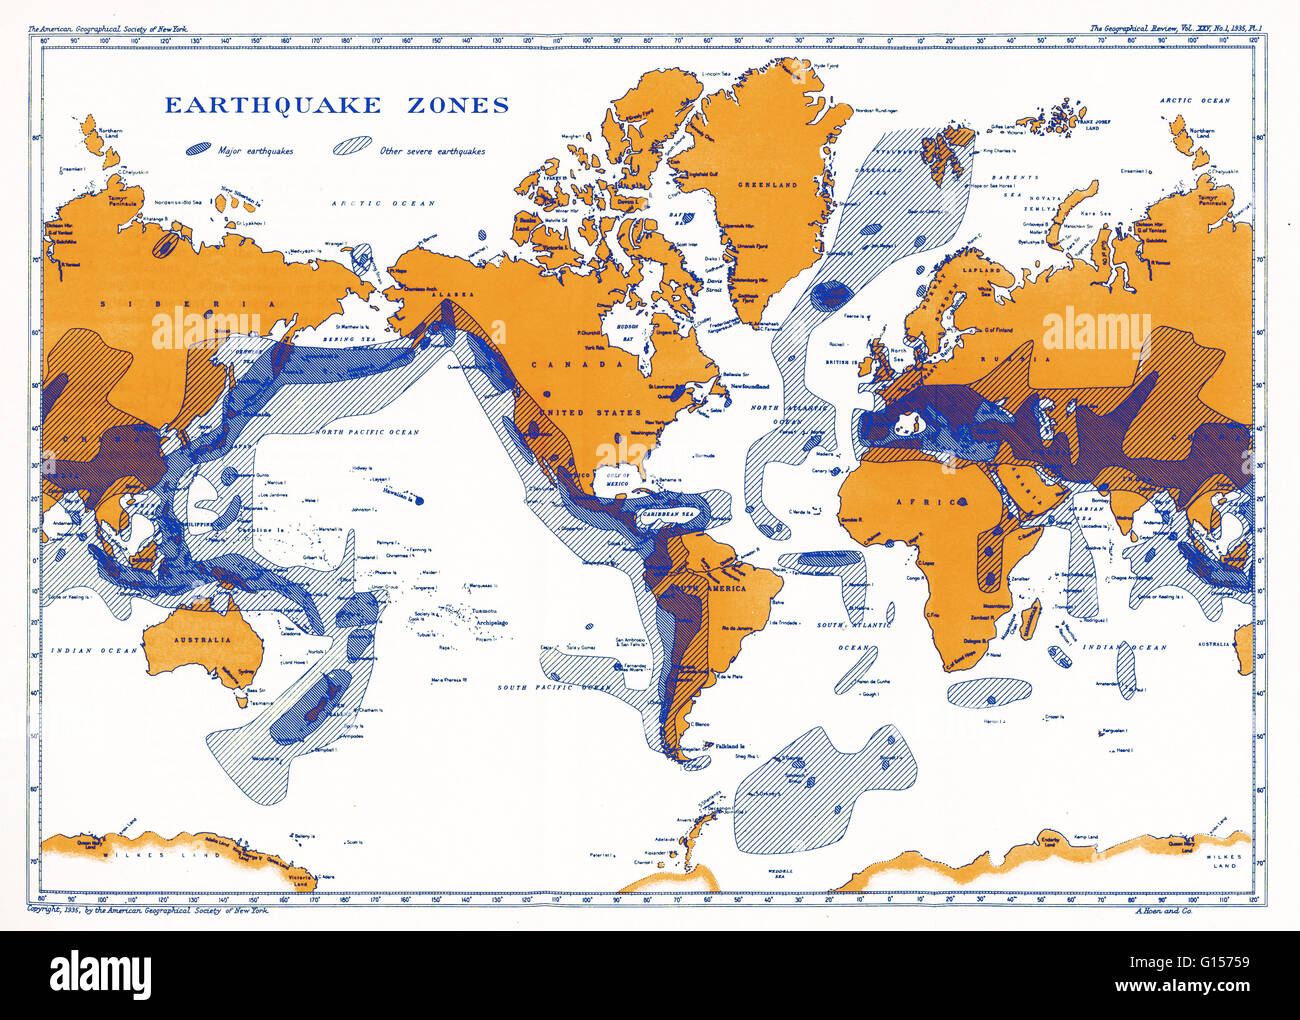 Map Of The World Showing Earthquake Zones A map showing earthquake zones. This world seismicity map clearly shows the correlation of the